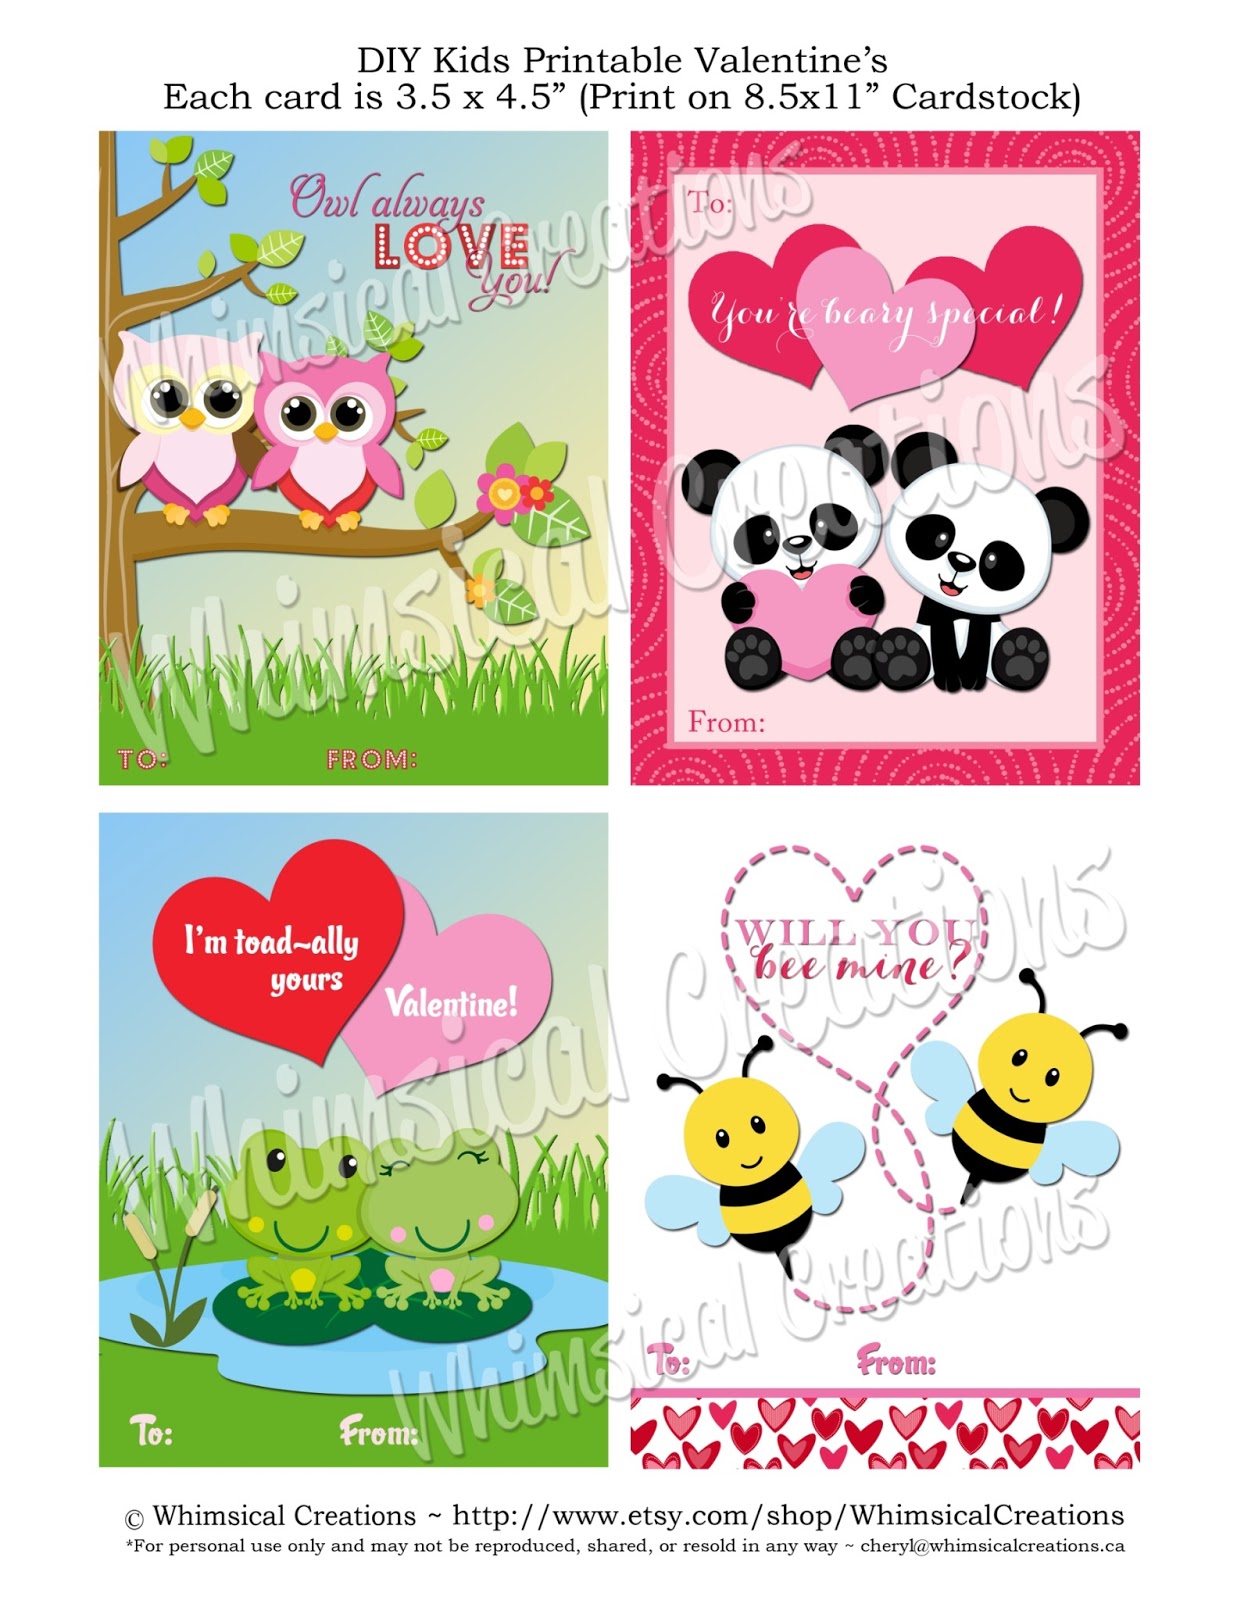 Free Printable Cards For Kids